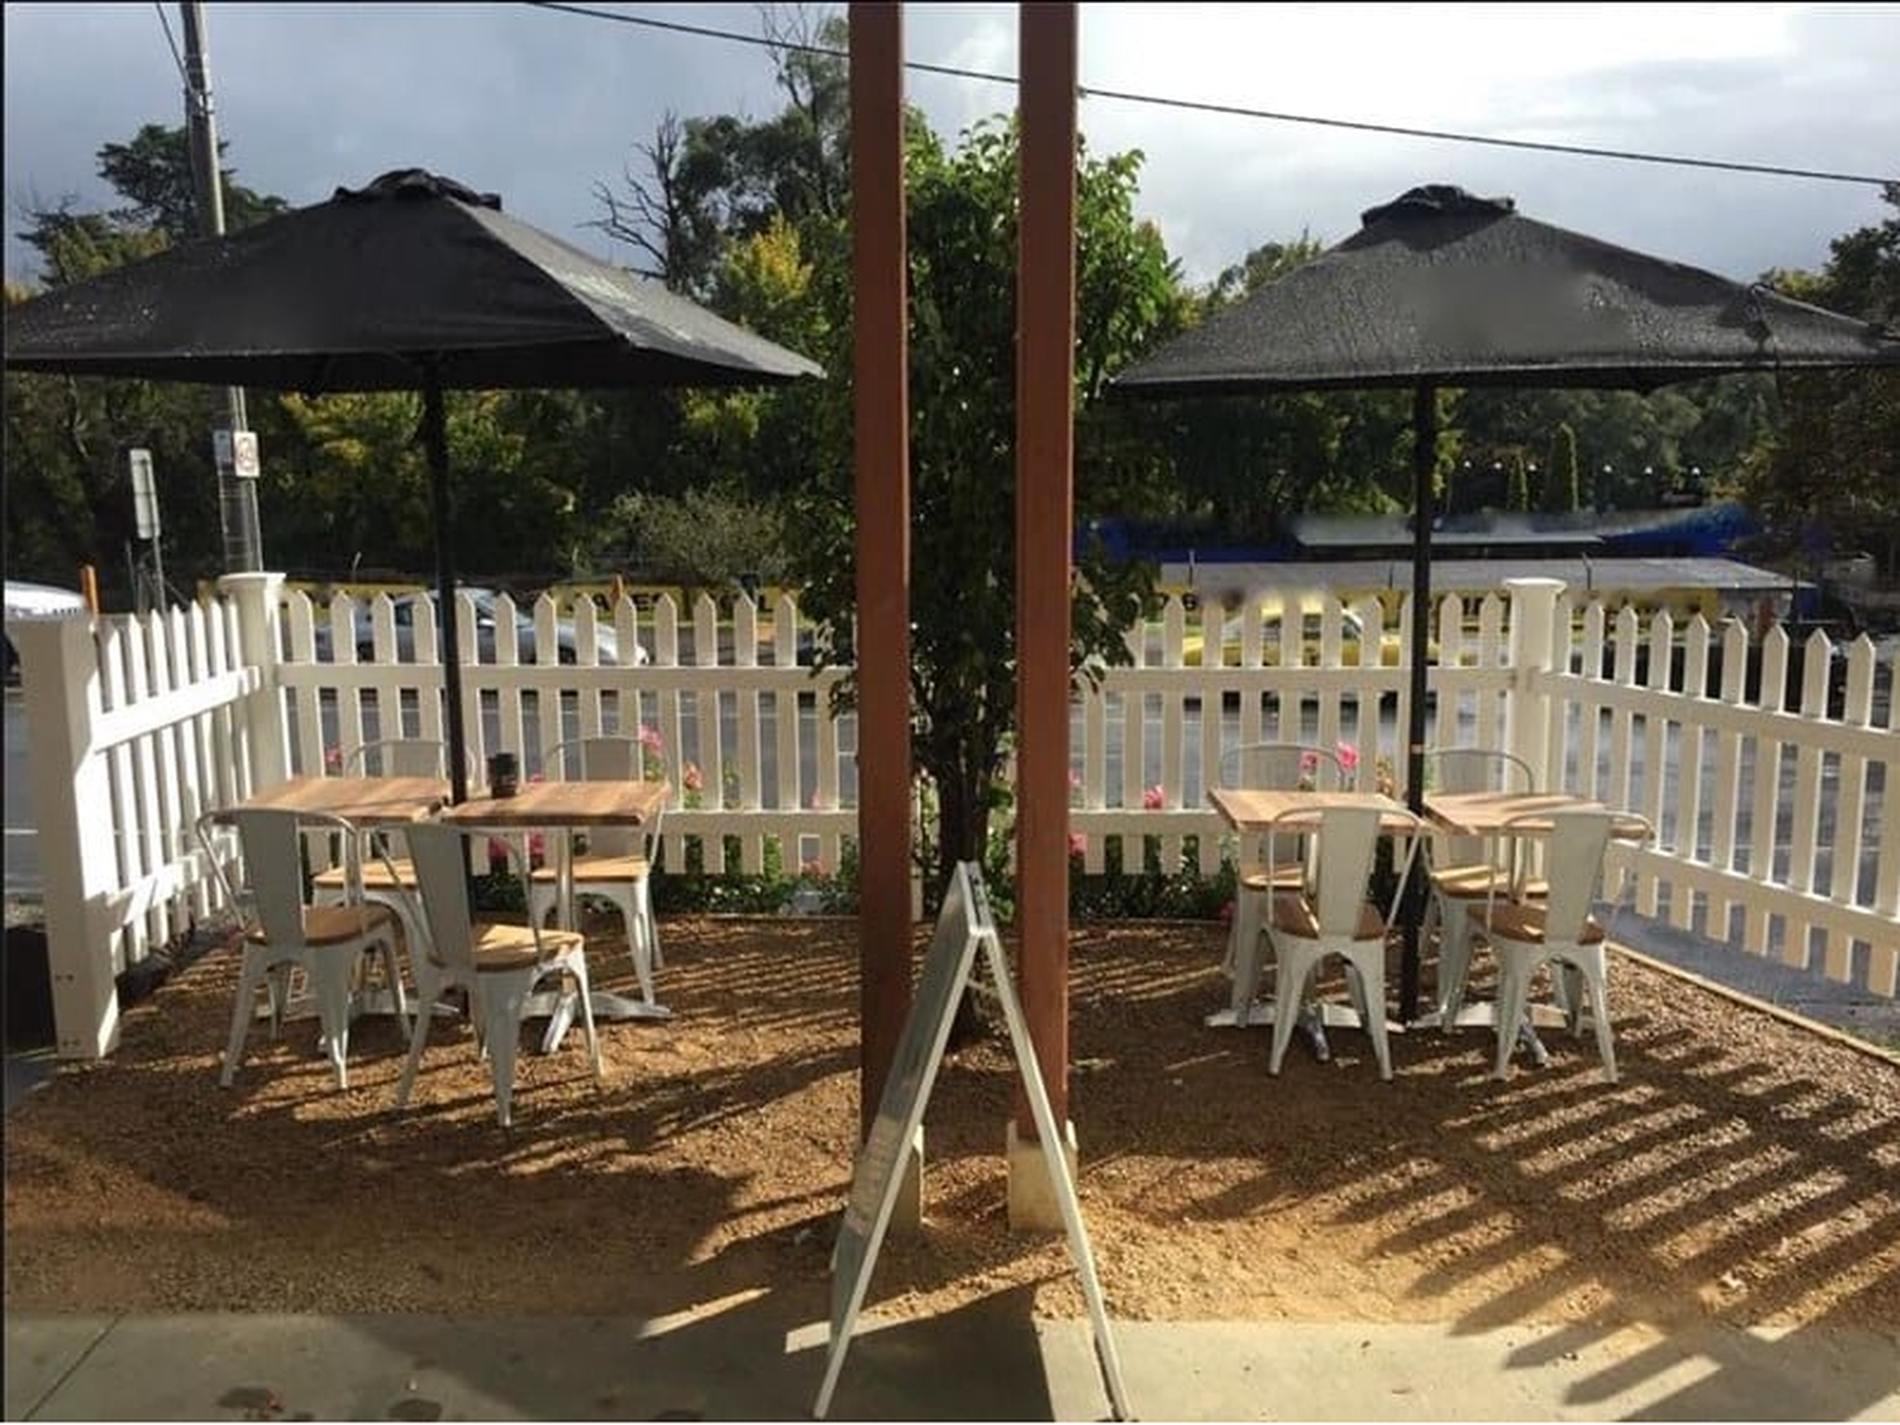 SOLD - Homewares and Cafe Lifestyle Business for Sale in Yarra Ranges